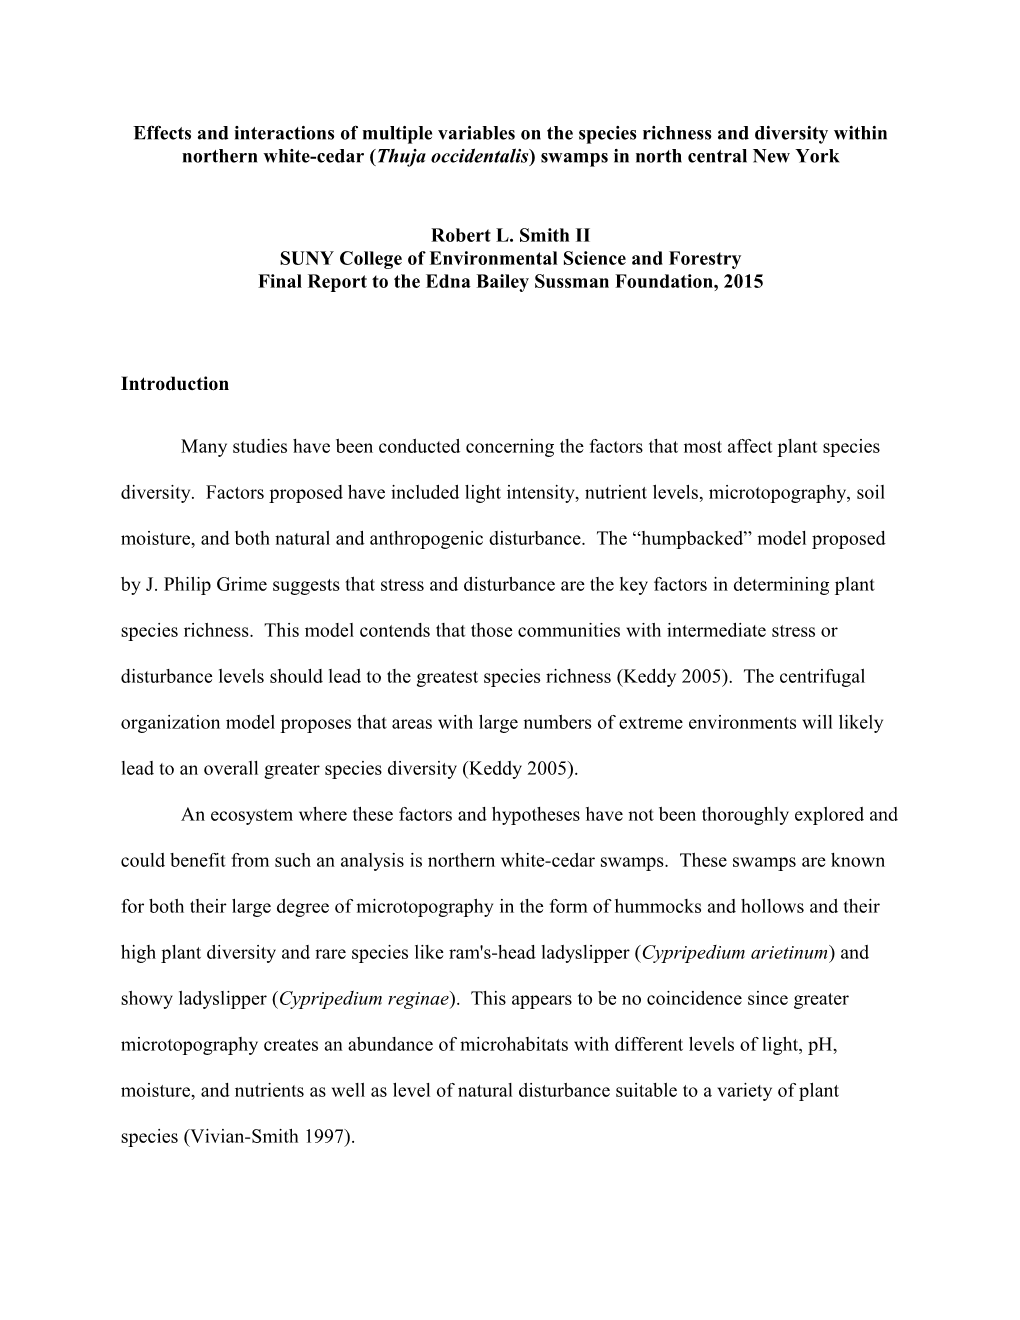 Robert L. Smith II SUNY College of Environmental Science and Forestry Final Report To